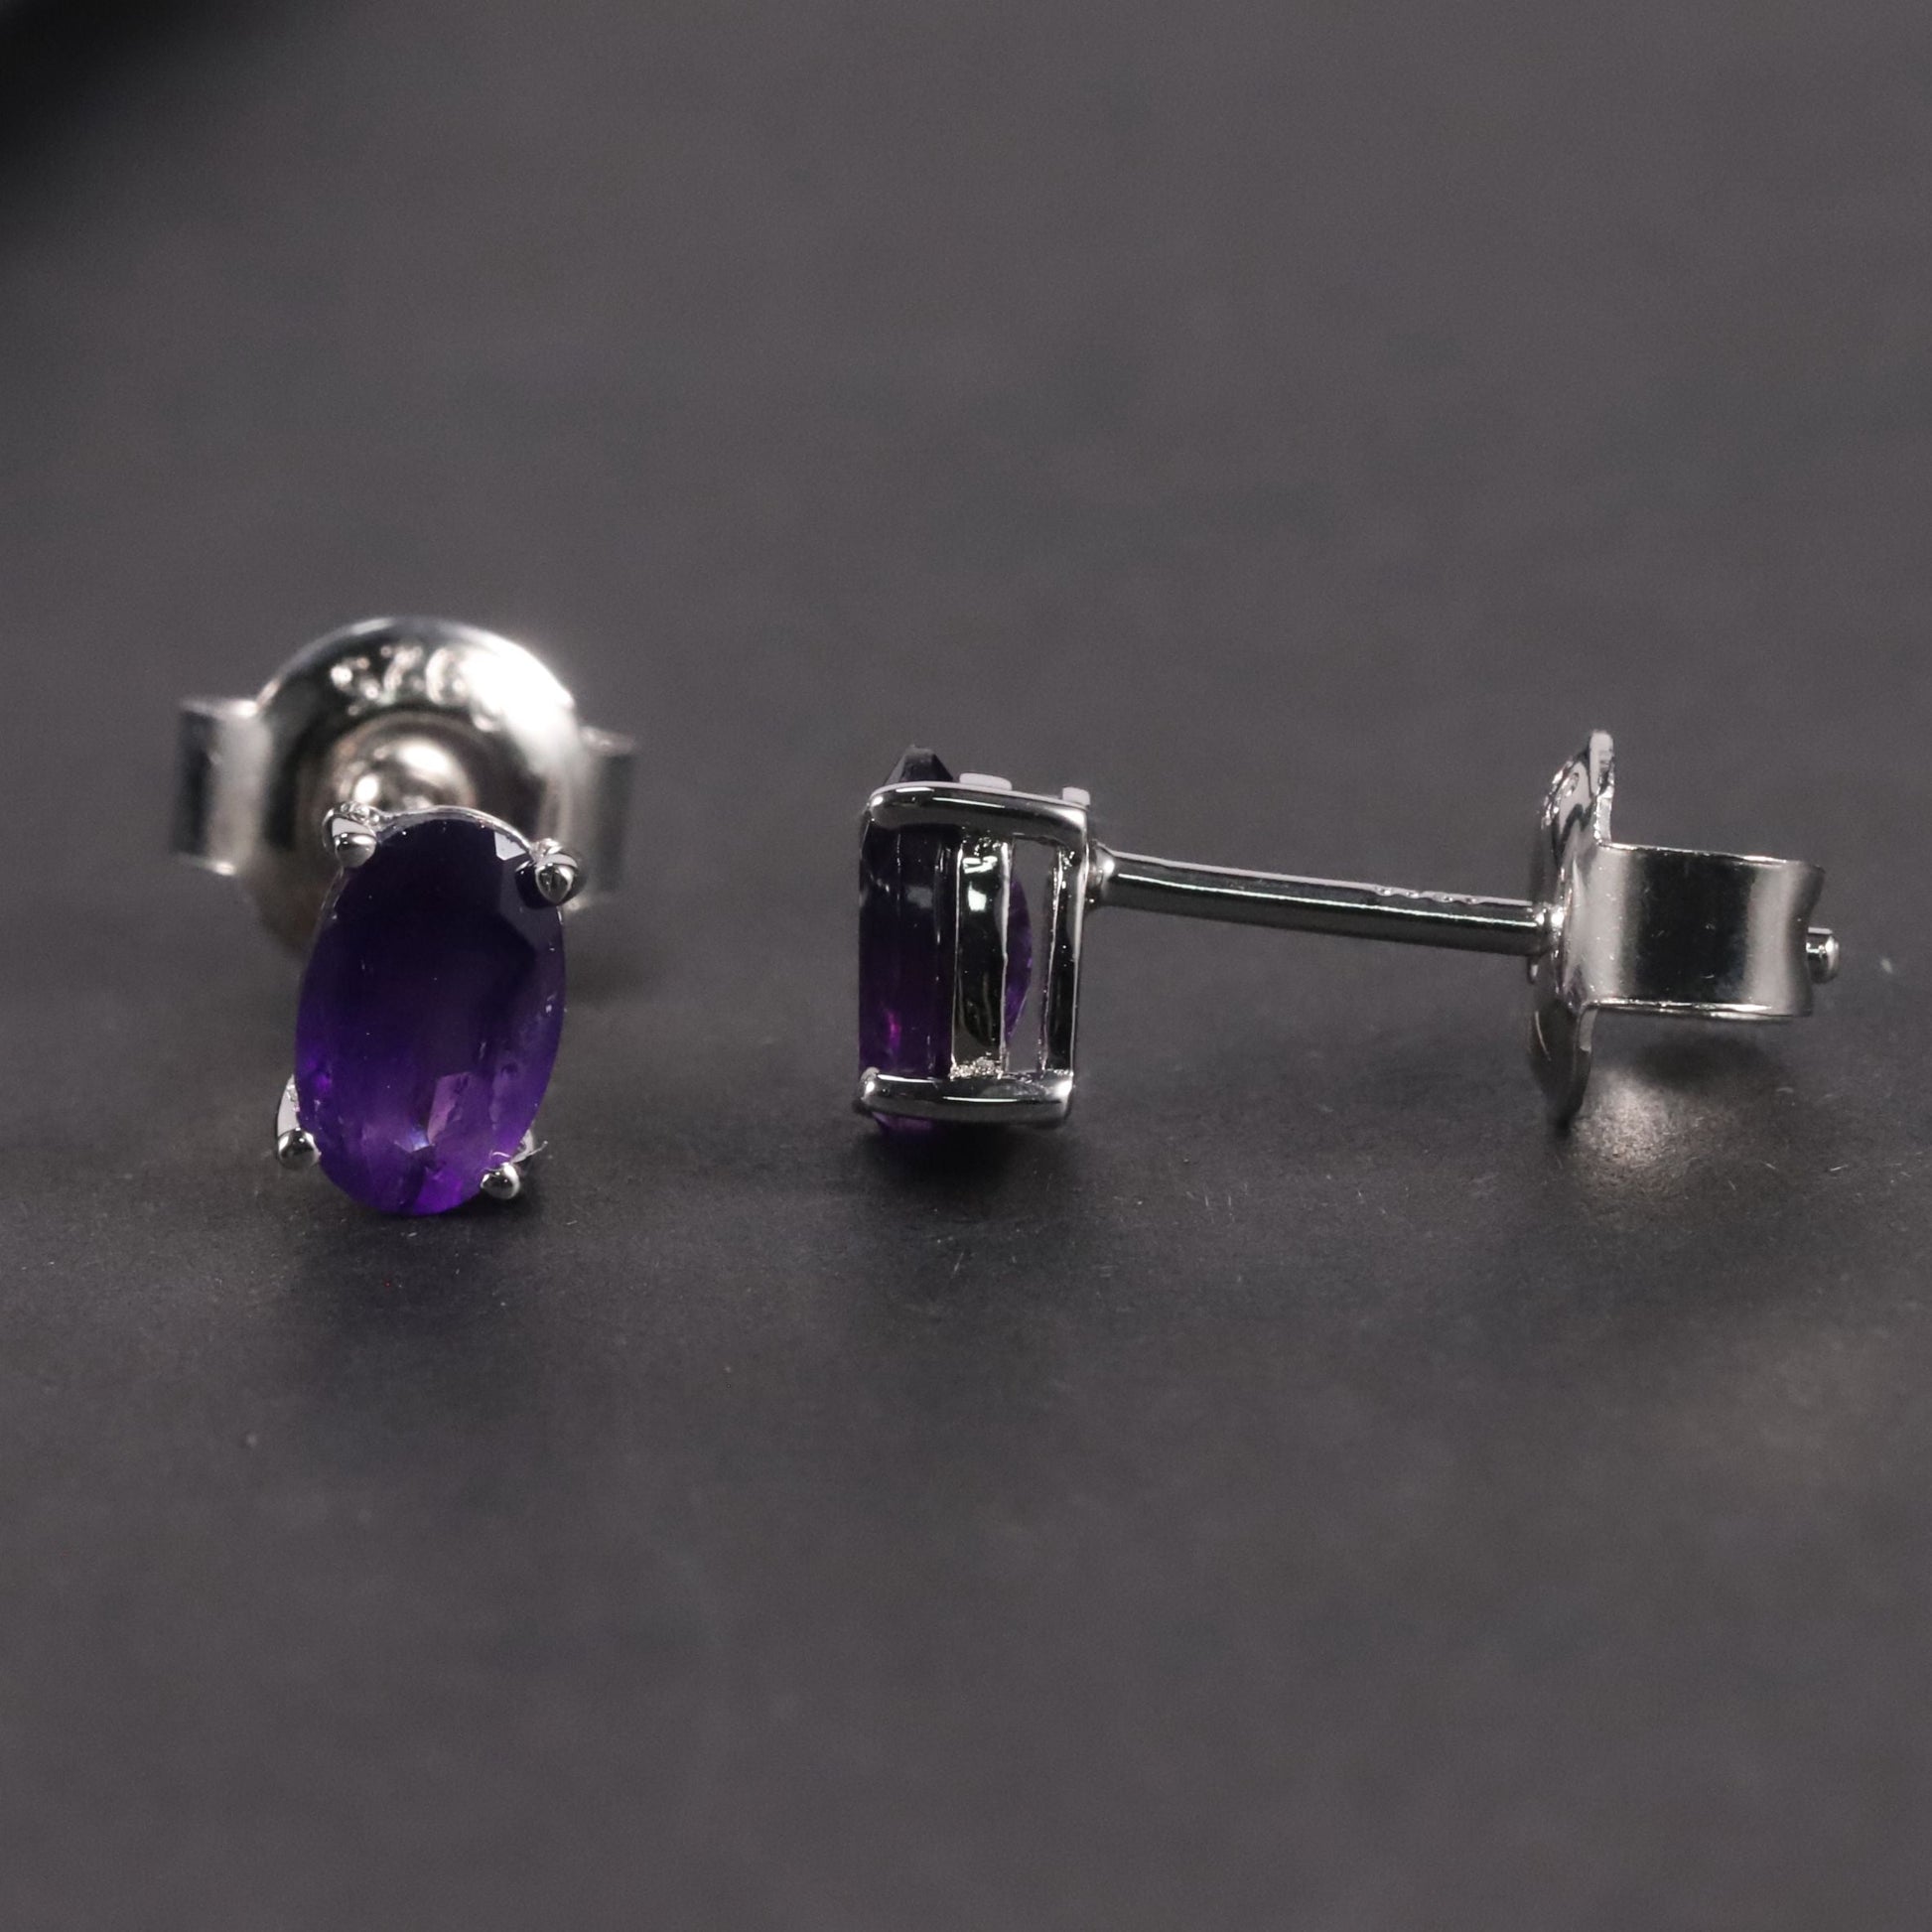 Side view of the Amethyst Oval Stud Earrings against a dark background, accentuating their exquisite design and craftsmanship.